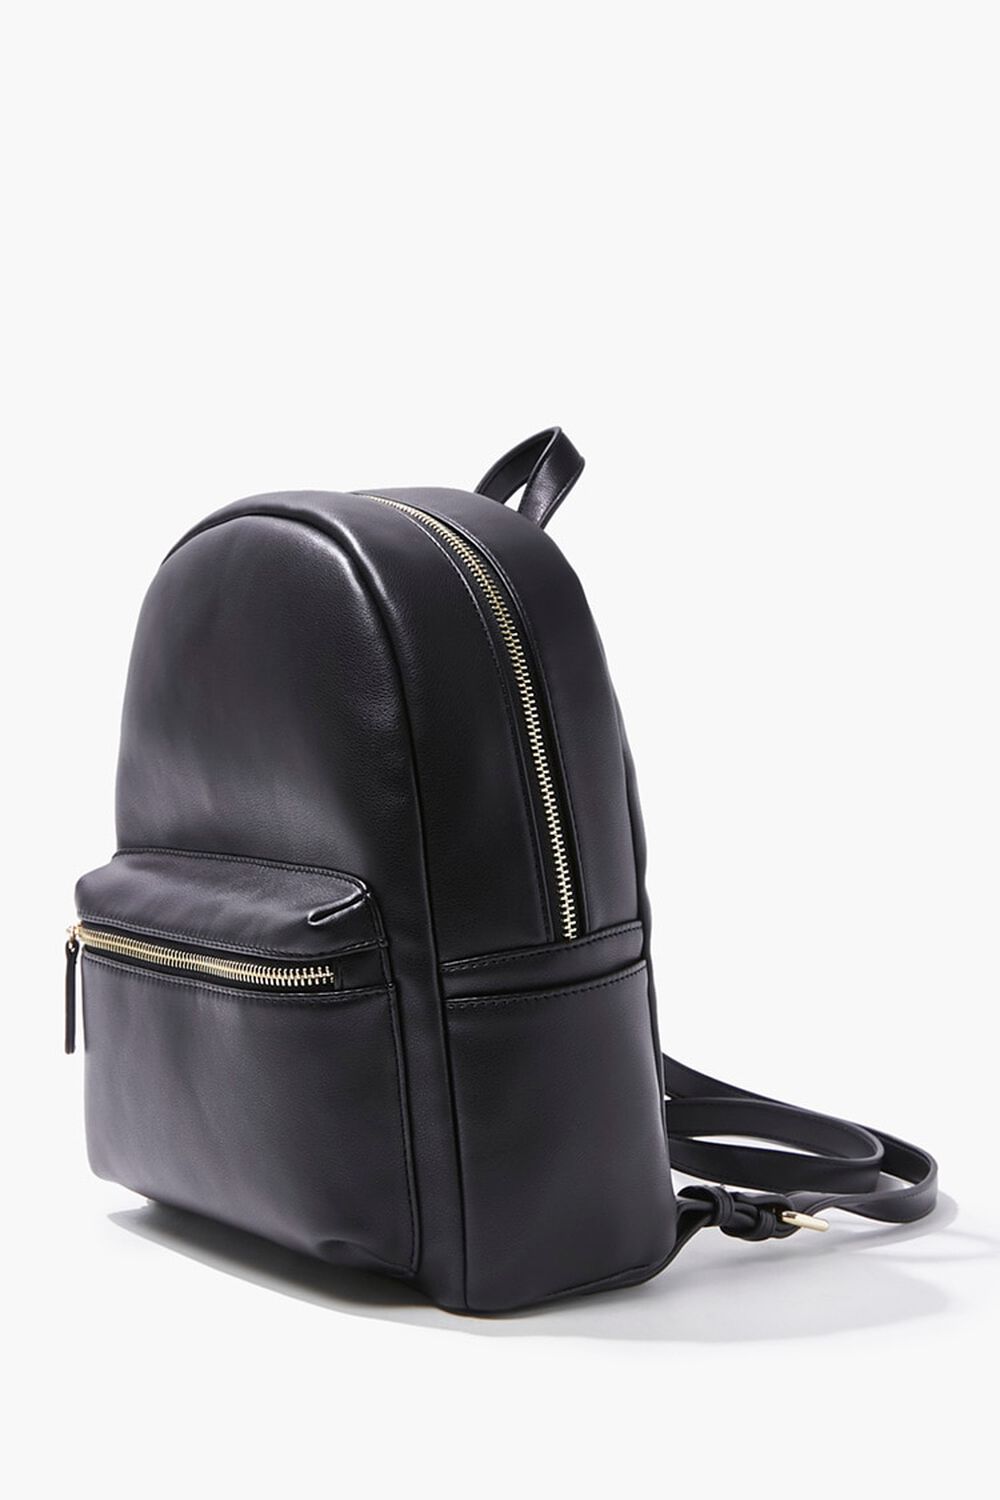 Embossed Leather Backpack AfricanAmericanBlackGifts